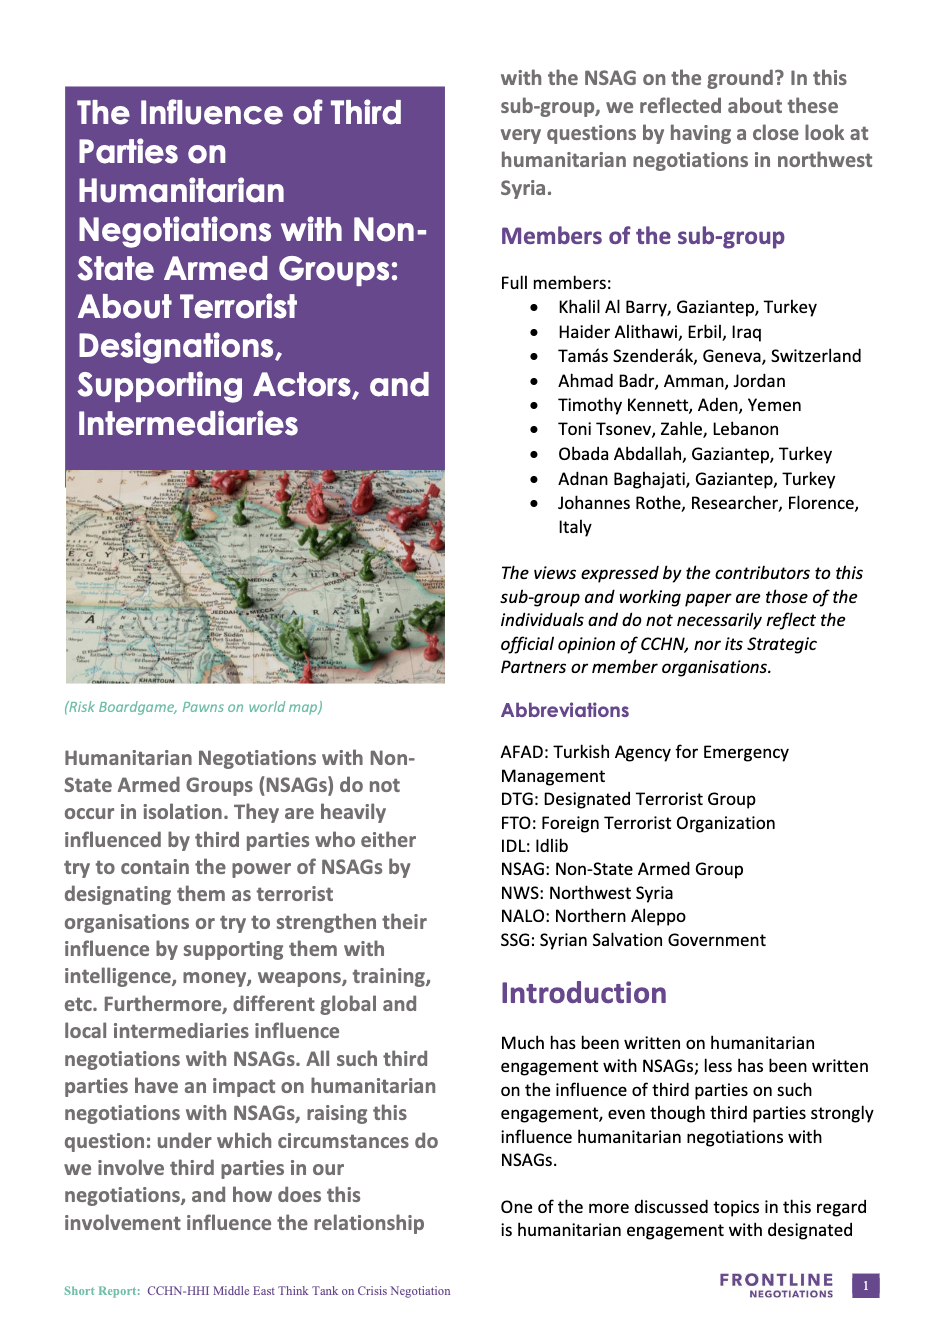 Middle East Think Tank short informe on the influence of third parties in negotiations with non-state armed groups